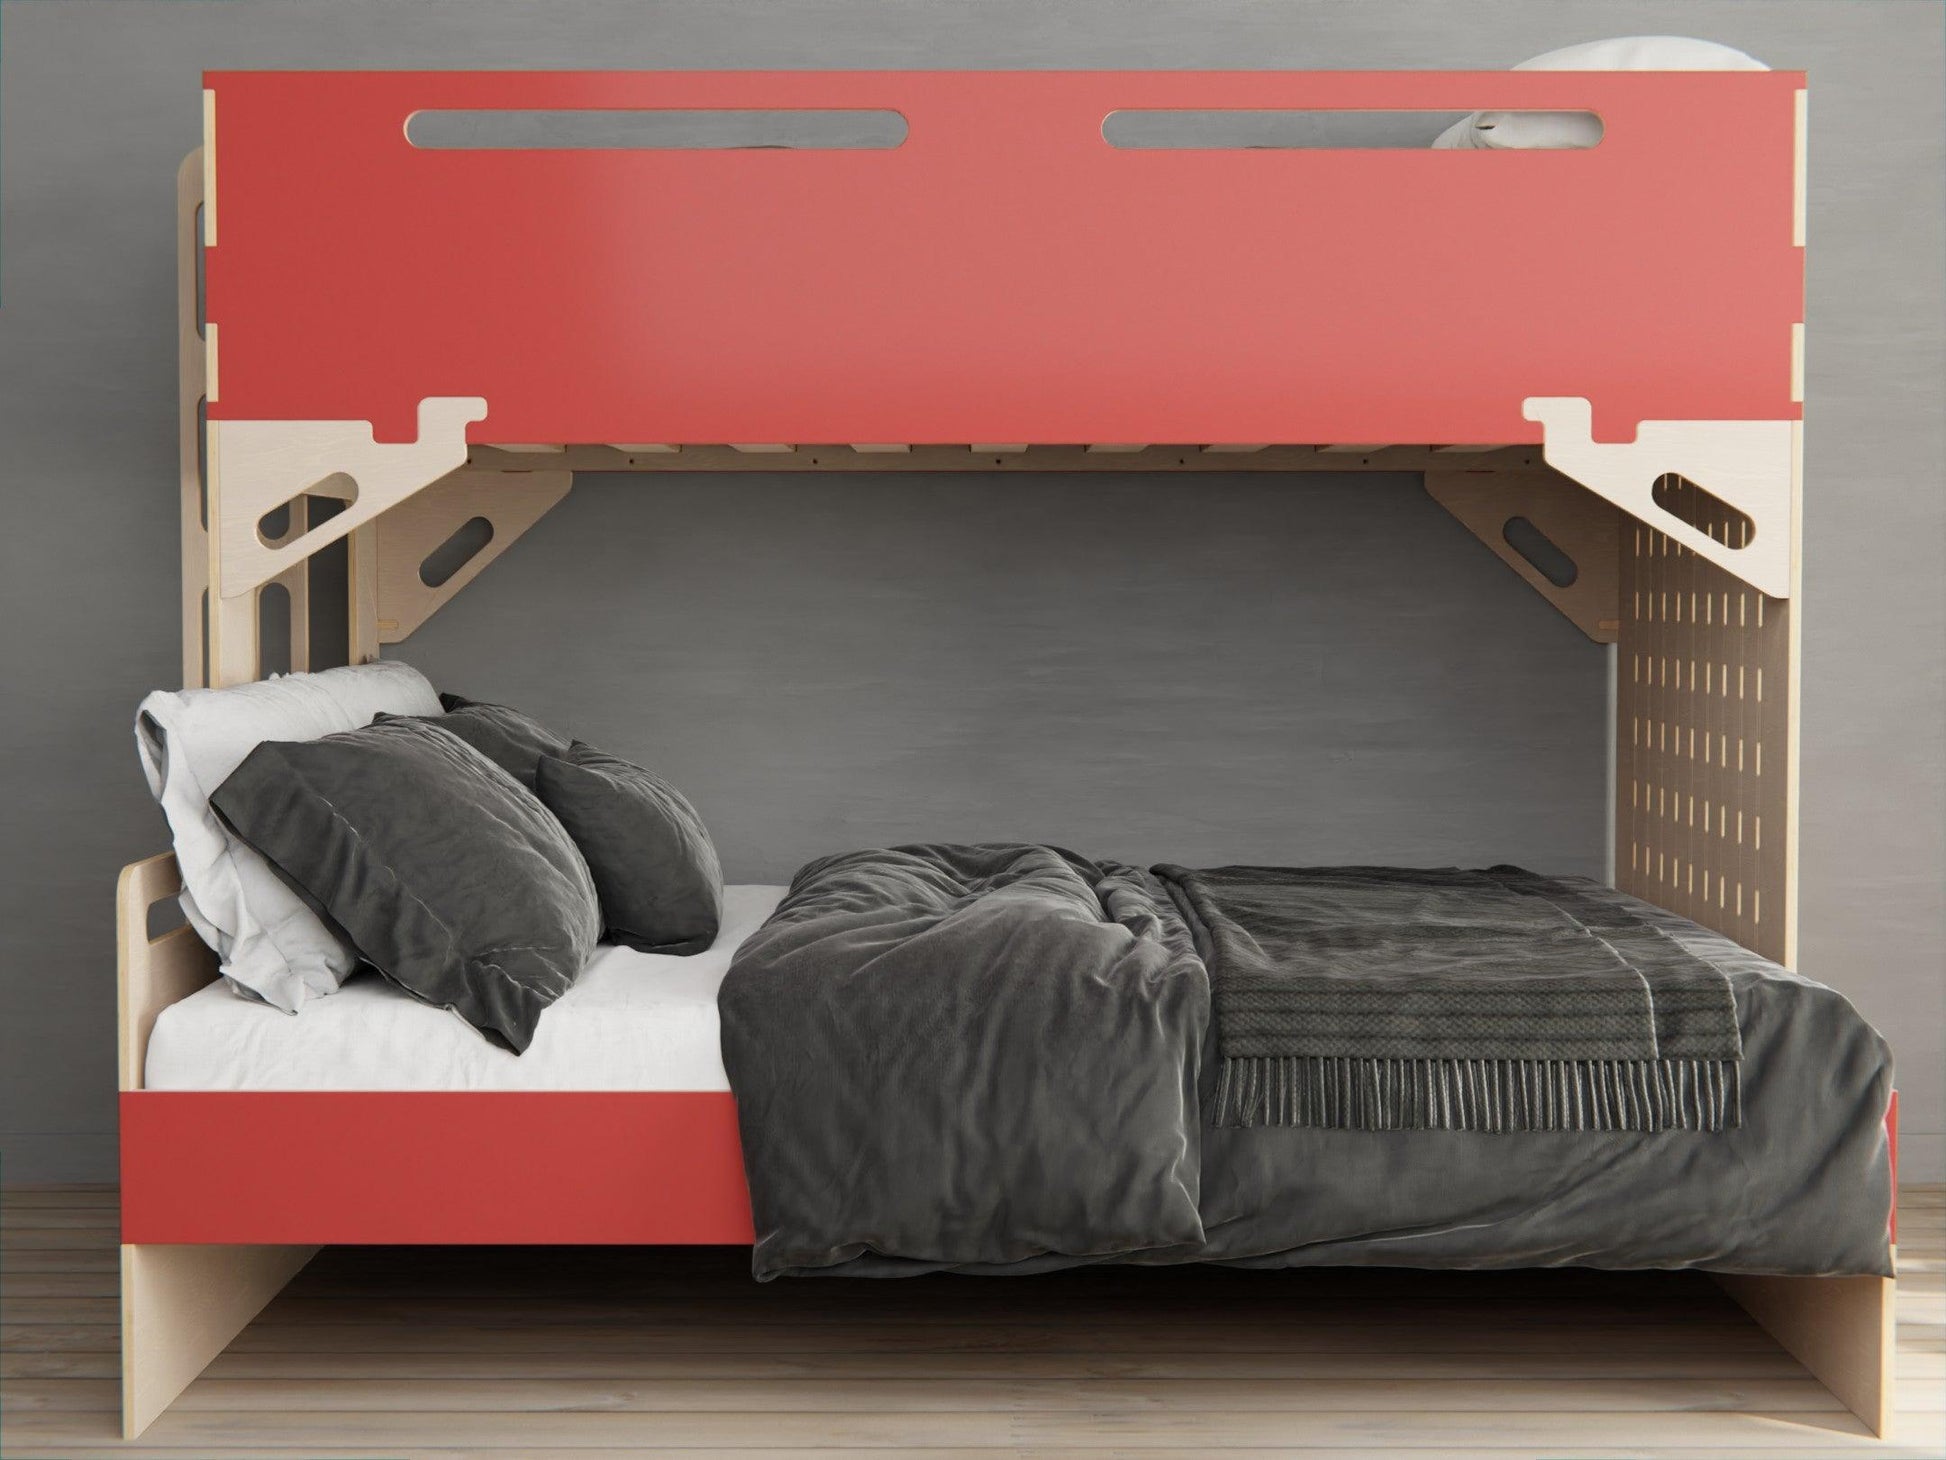 Discover the luxury of our space-saving plywood triple bunk bed in red. Perfect for large families or sleepovers.